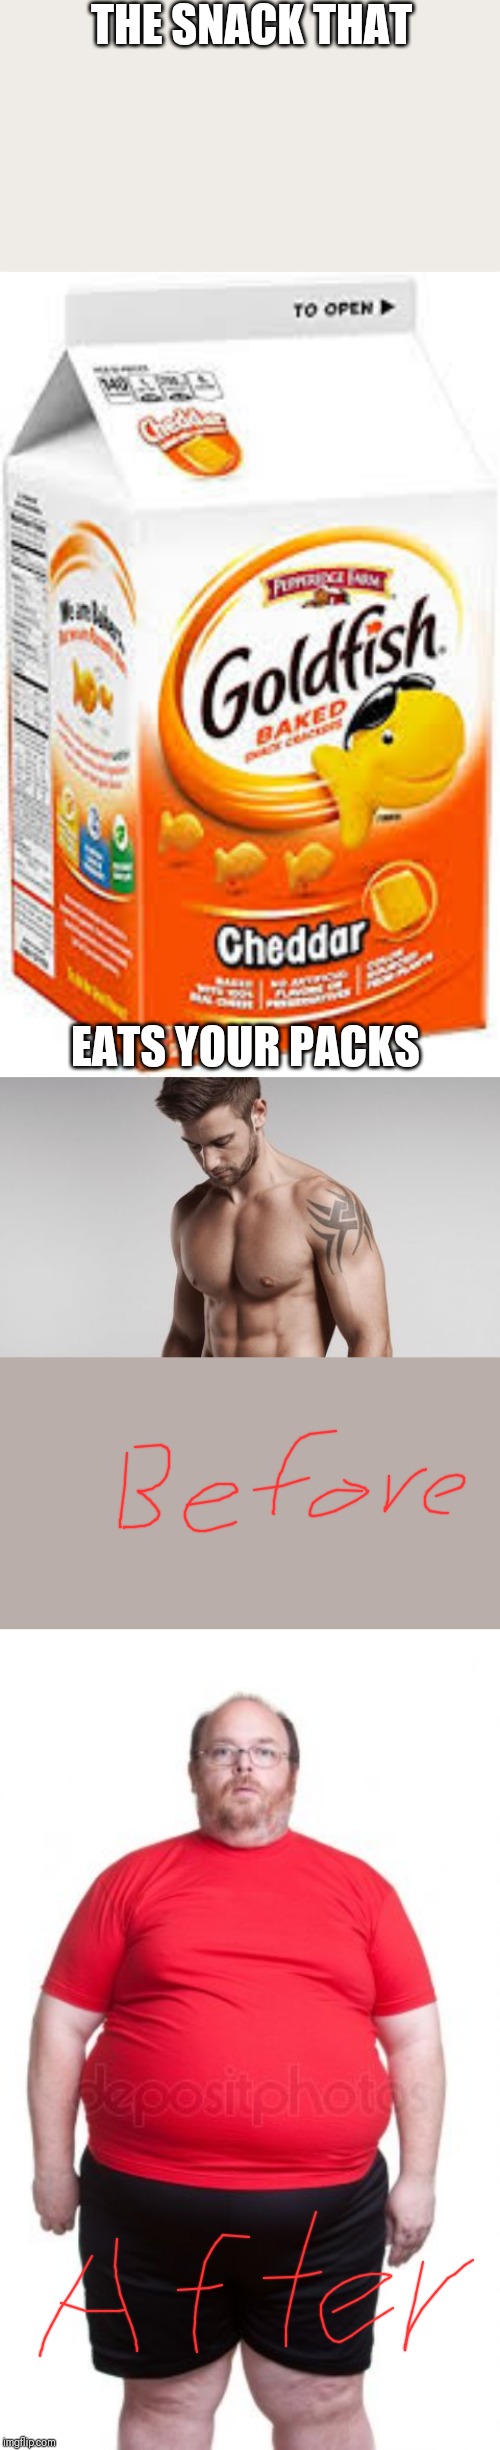 THE SNACK THAT; EATS YOUR PACKS | image tagged in goldfish crackers | made w/ Imgflip meme maker